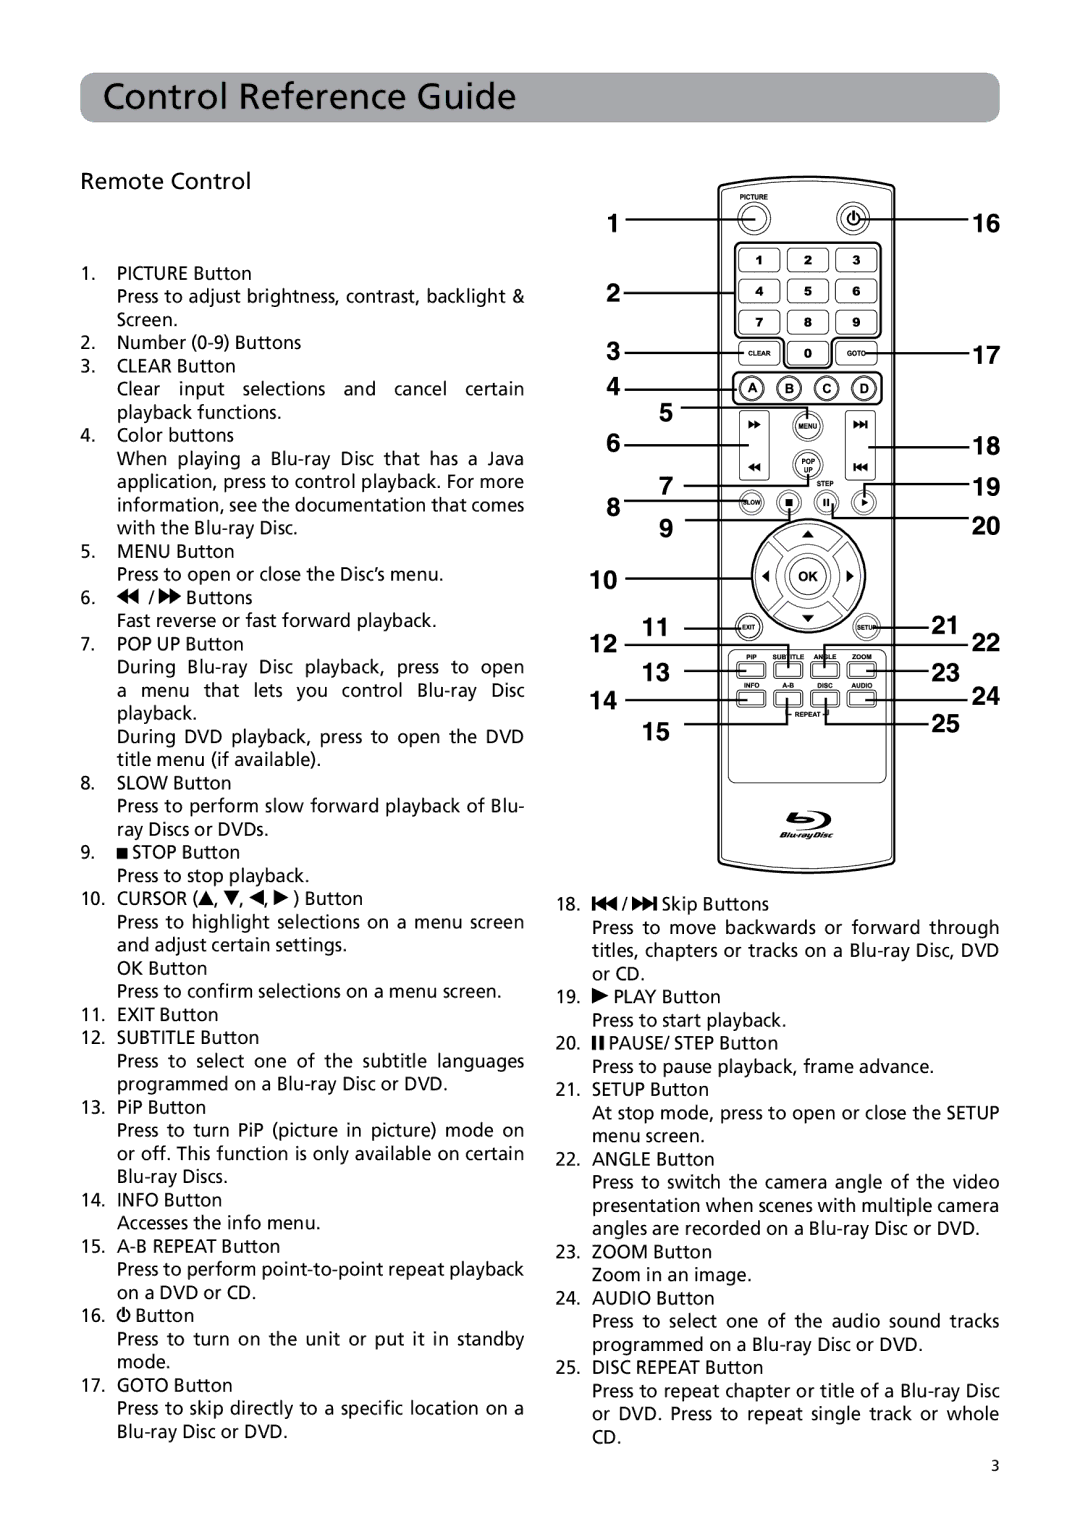 RCA BRC3108 user manual Control Reference Guide, Remote Control 